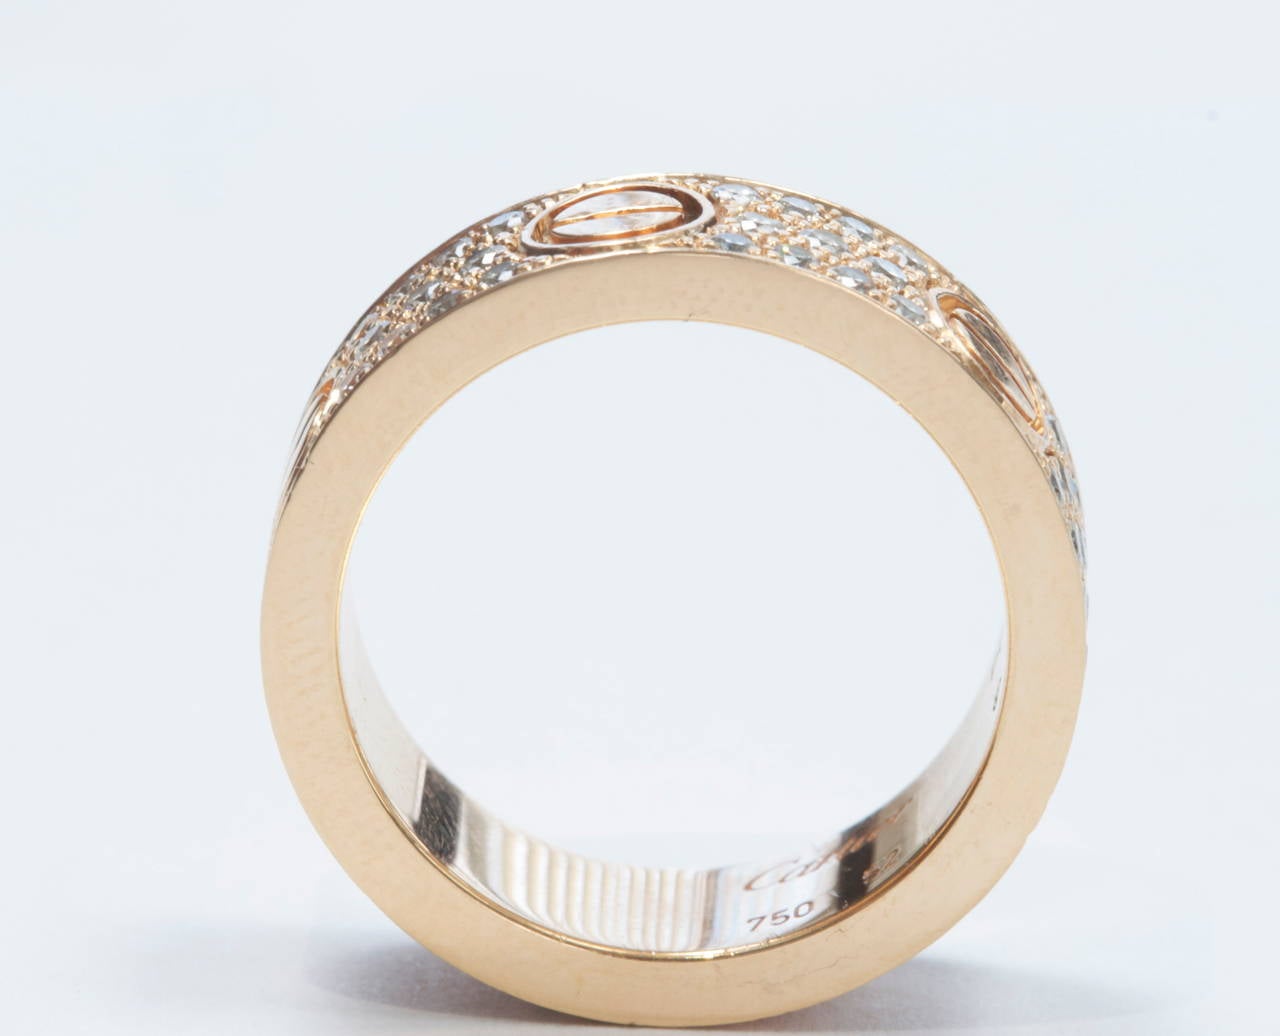 The identifiable love ring by Cartier with a modern twist. Designed with three rows of diamonds that have been separated by the classic screw engraving evenly spaced throughout. Crafted in 18k rose gold and signed Cartier. 

Where will love take